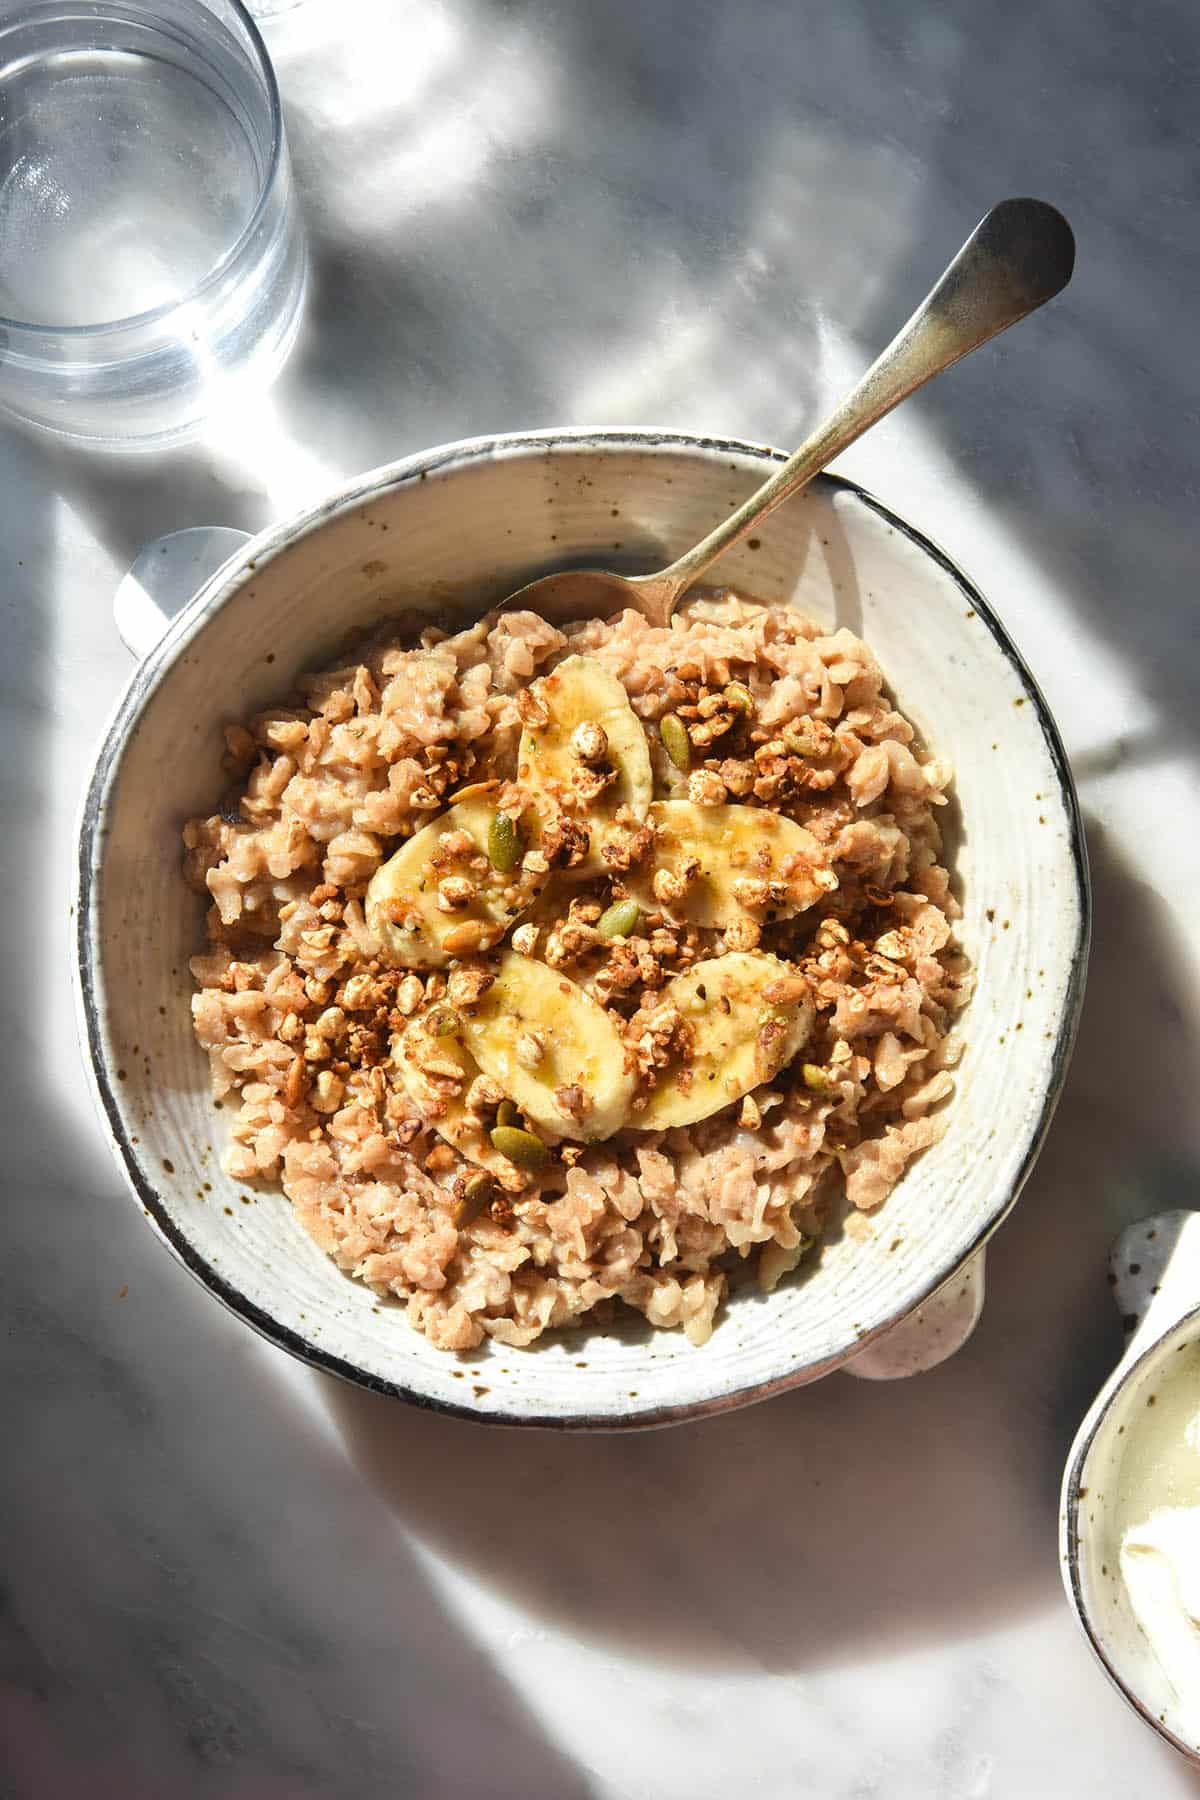 An aerial sunlit image of a bowl of gluten free porridge topped with banana coins and gluten free granola. The bowl sits atop a white marble table and two glasses of water sit to the top left of the image